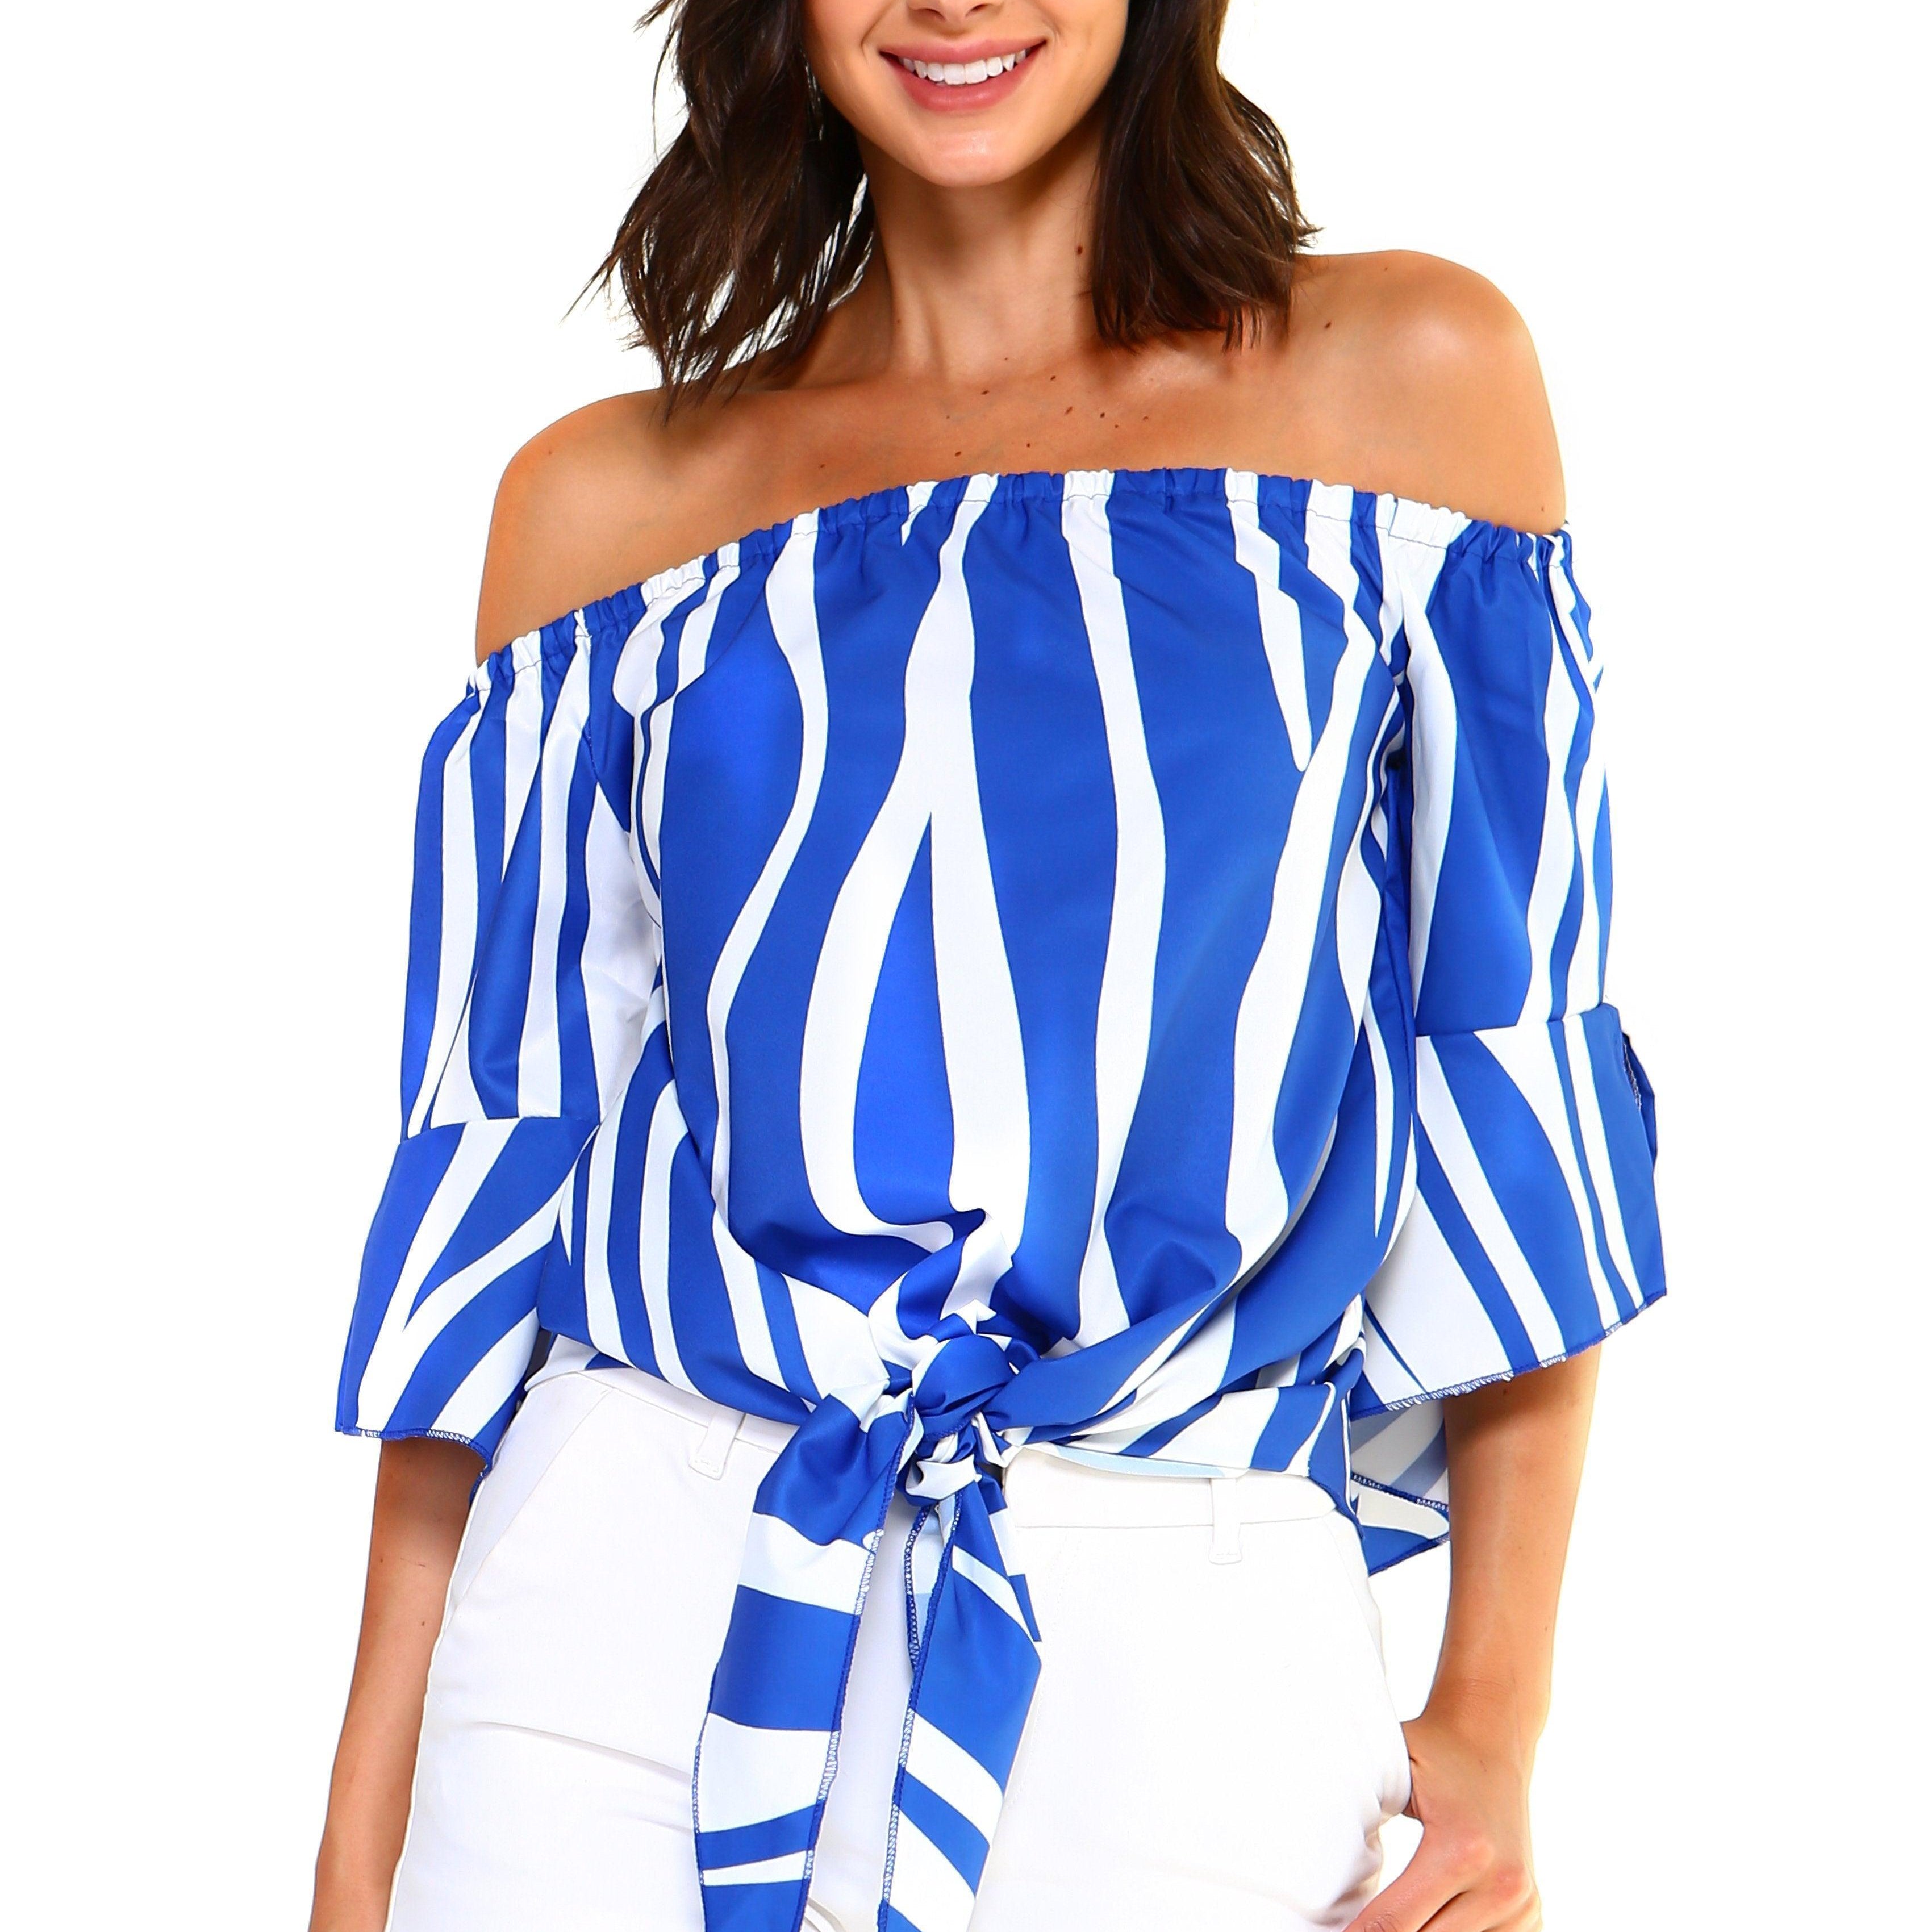 Women's Shirts Womens Strapless Striped Bandage Blouse Tie Front Shirt